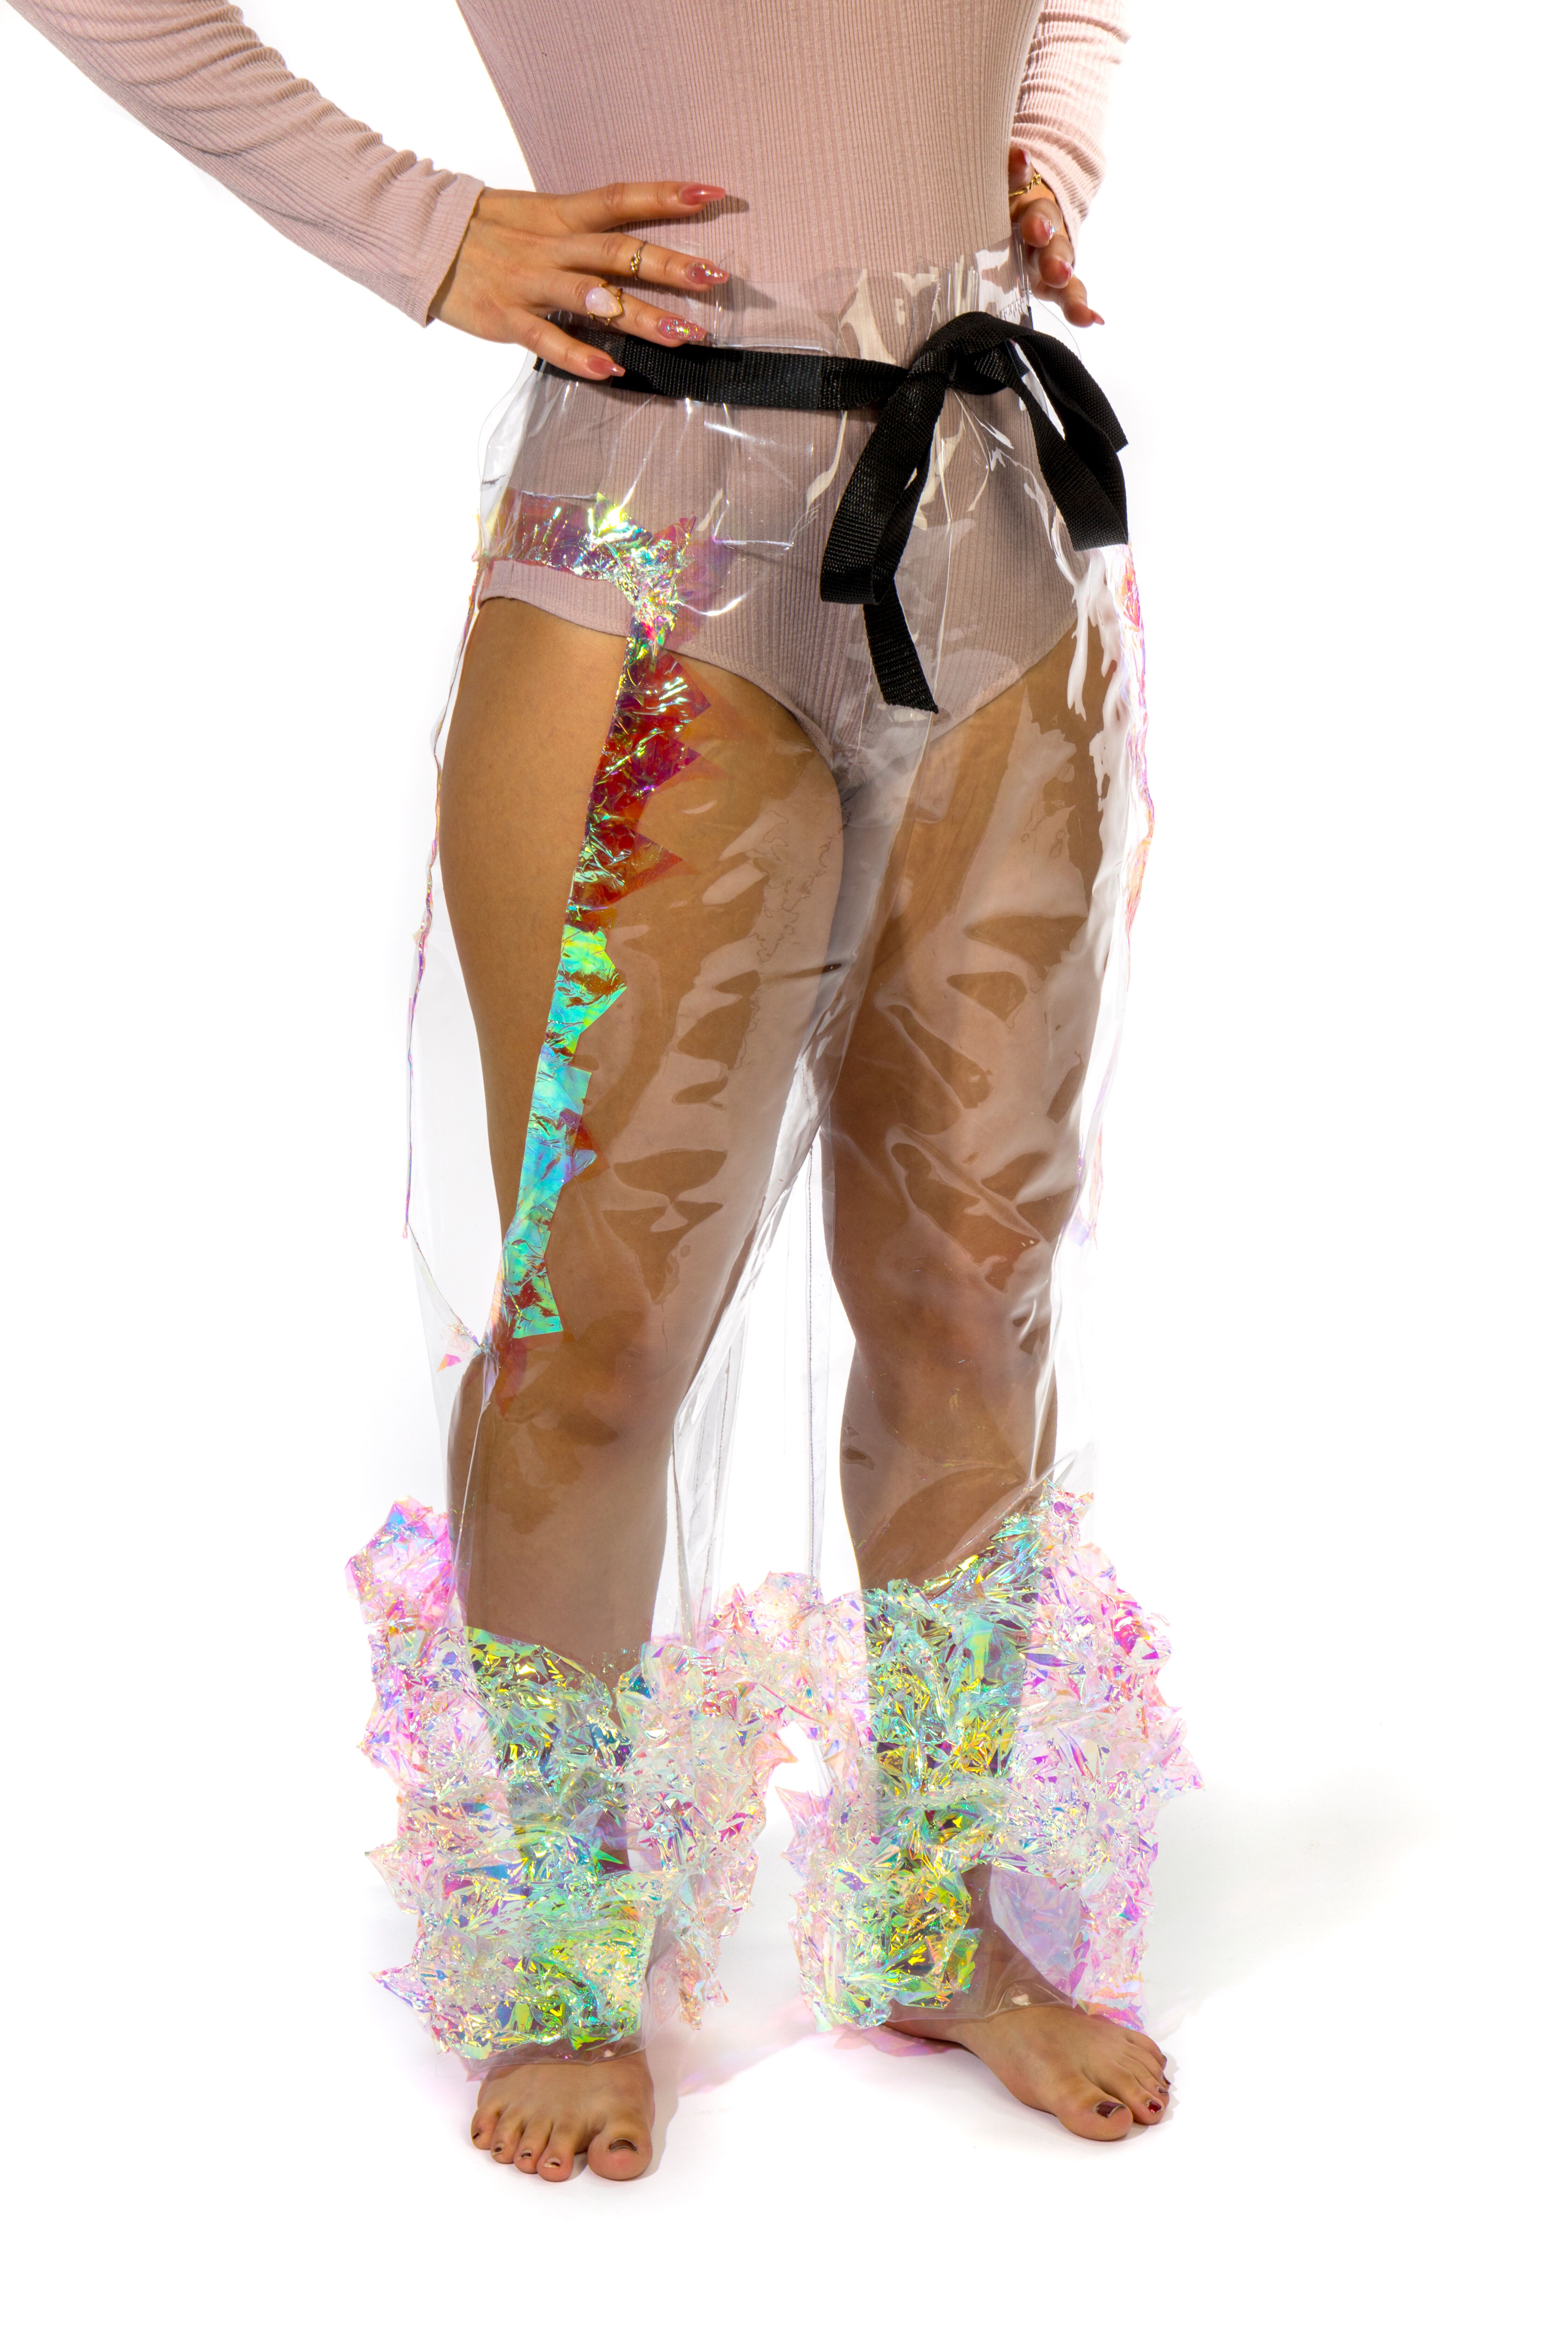 A pair of pants made up of cellophane by Ellie Mullen  